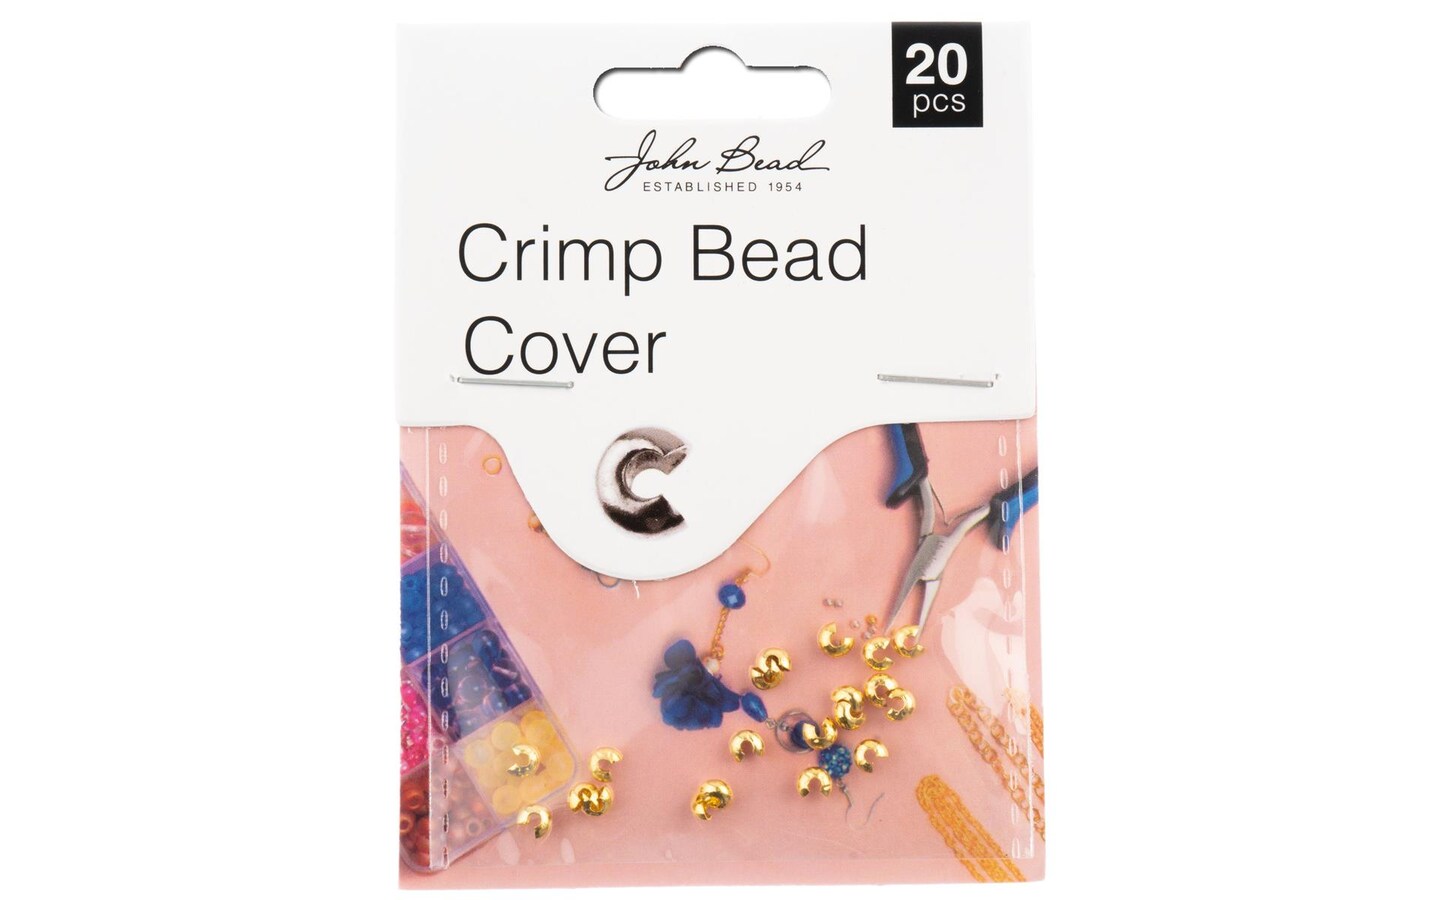 How to Use a Crimp Cover